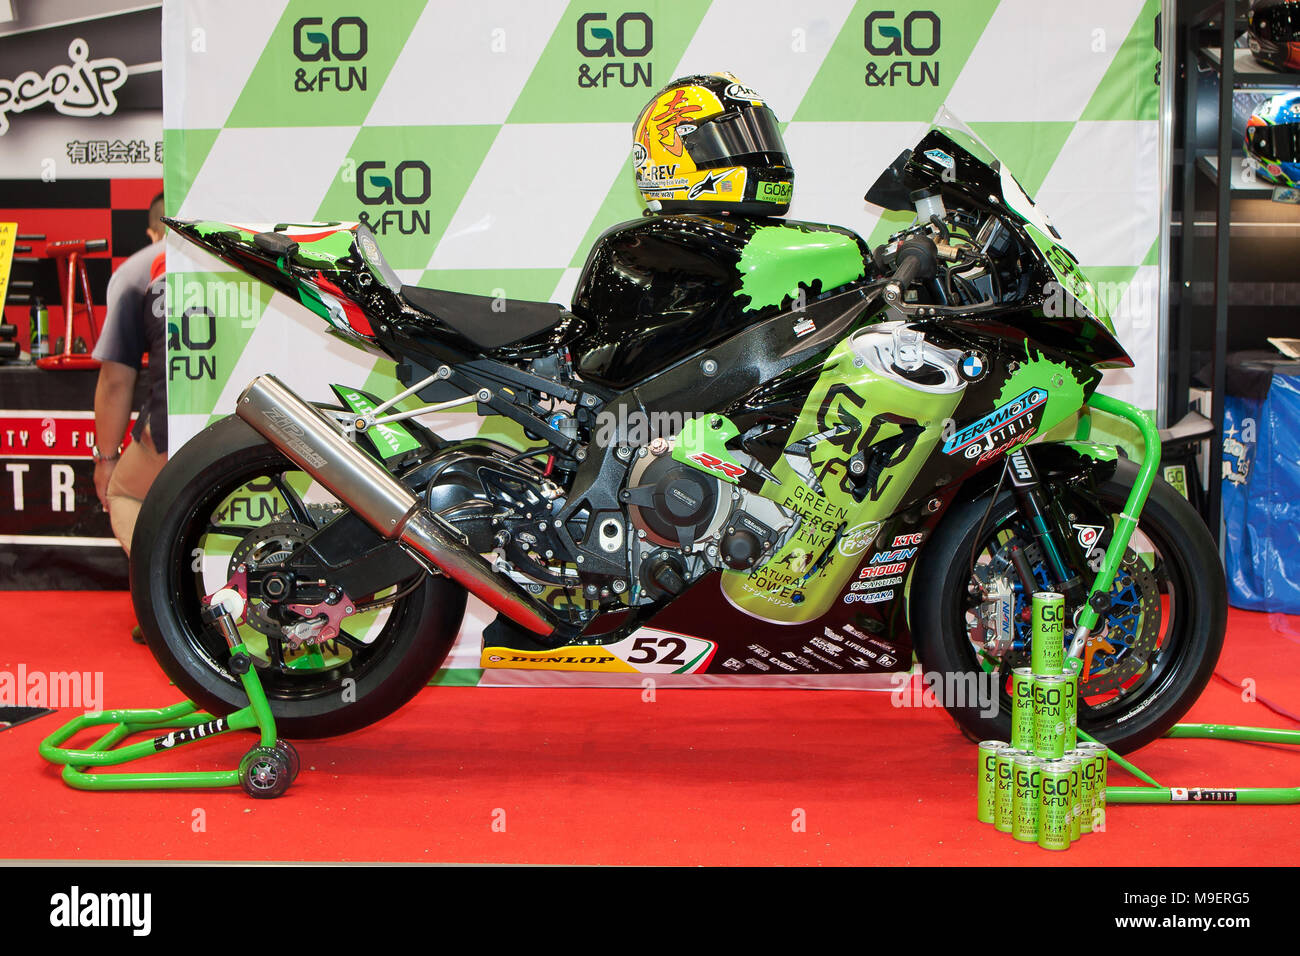 18 03 23 Tokyo The 45th Tokyo Motorcycle Show At Tokyo Big Sight Opened From March 23th 25th Go Fun Energy Drink Photos By Michael Steinebach Aflo Credit Aflo Co Ltd Alamy Live News Stock Photo Alamy